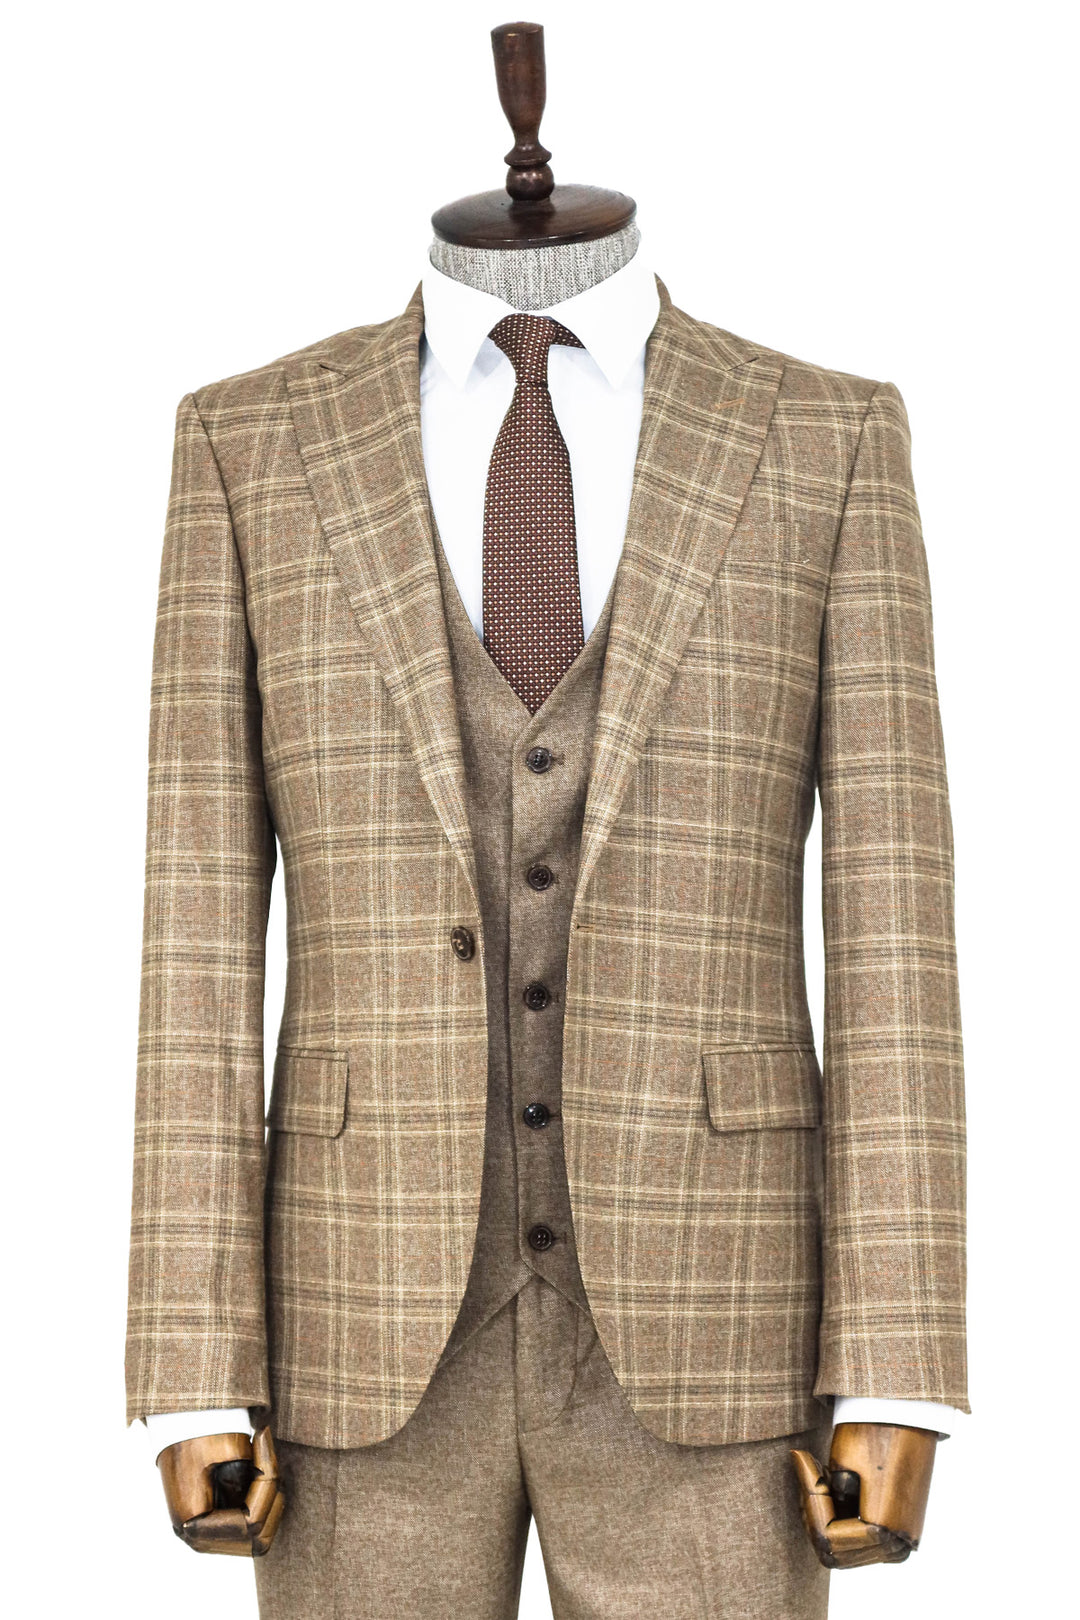 Checked Slim Fit Light Brown Men Suit and Shirt Combination- Wessi